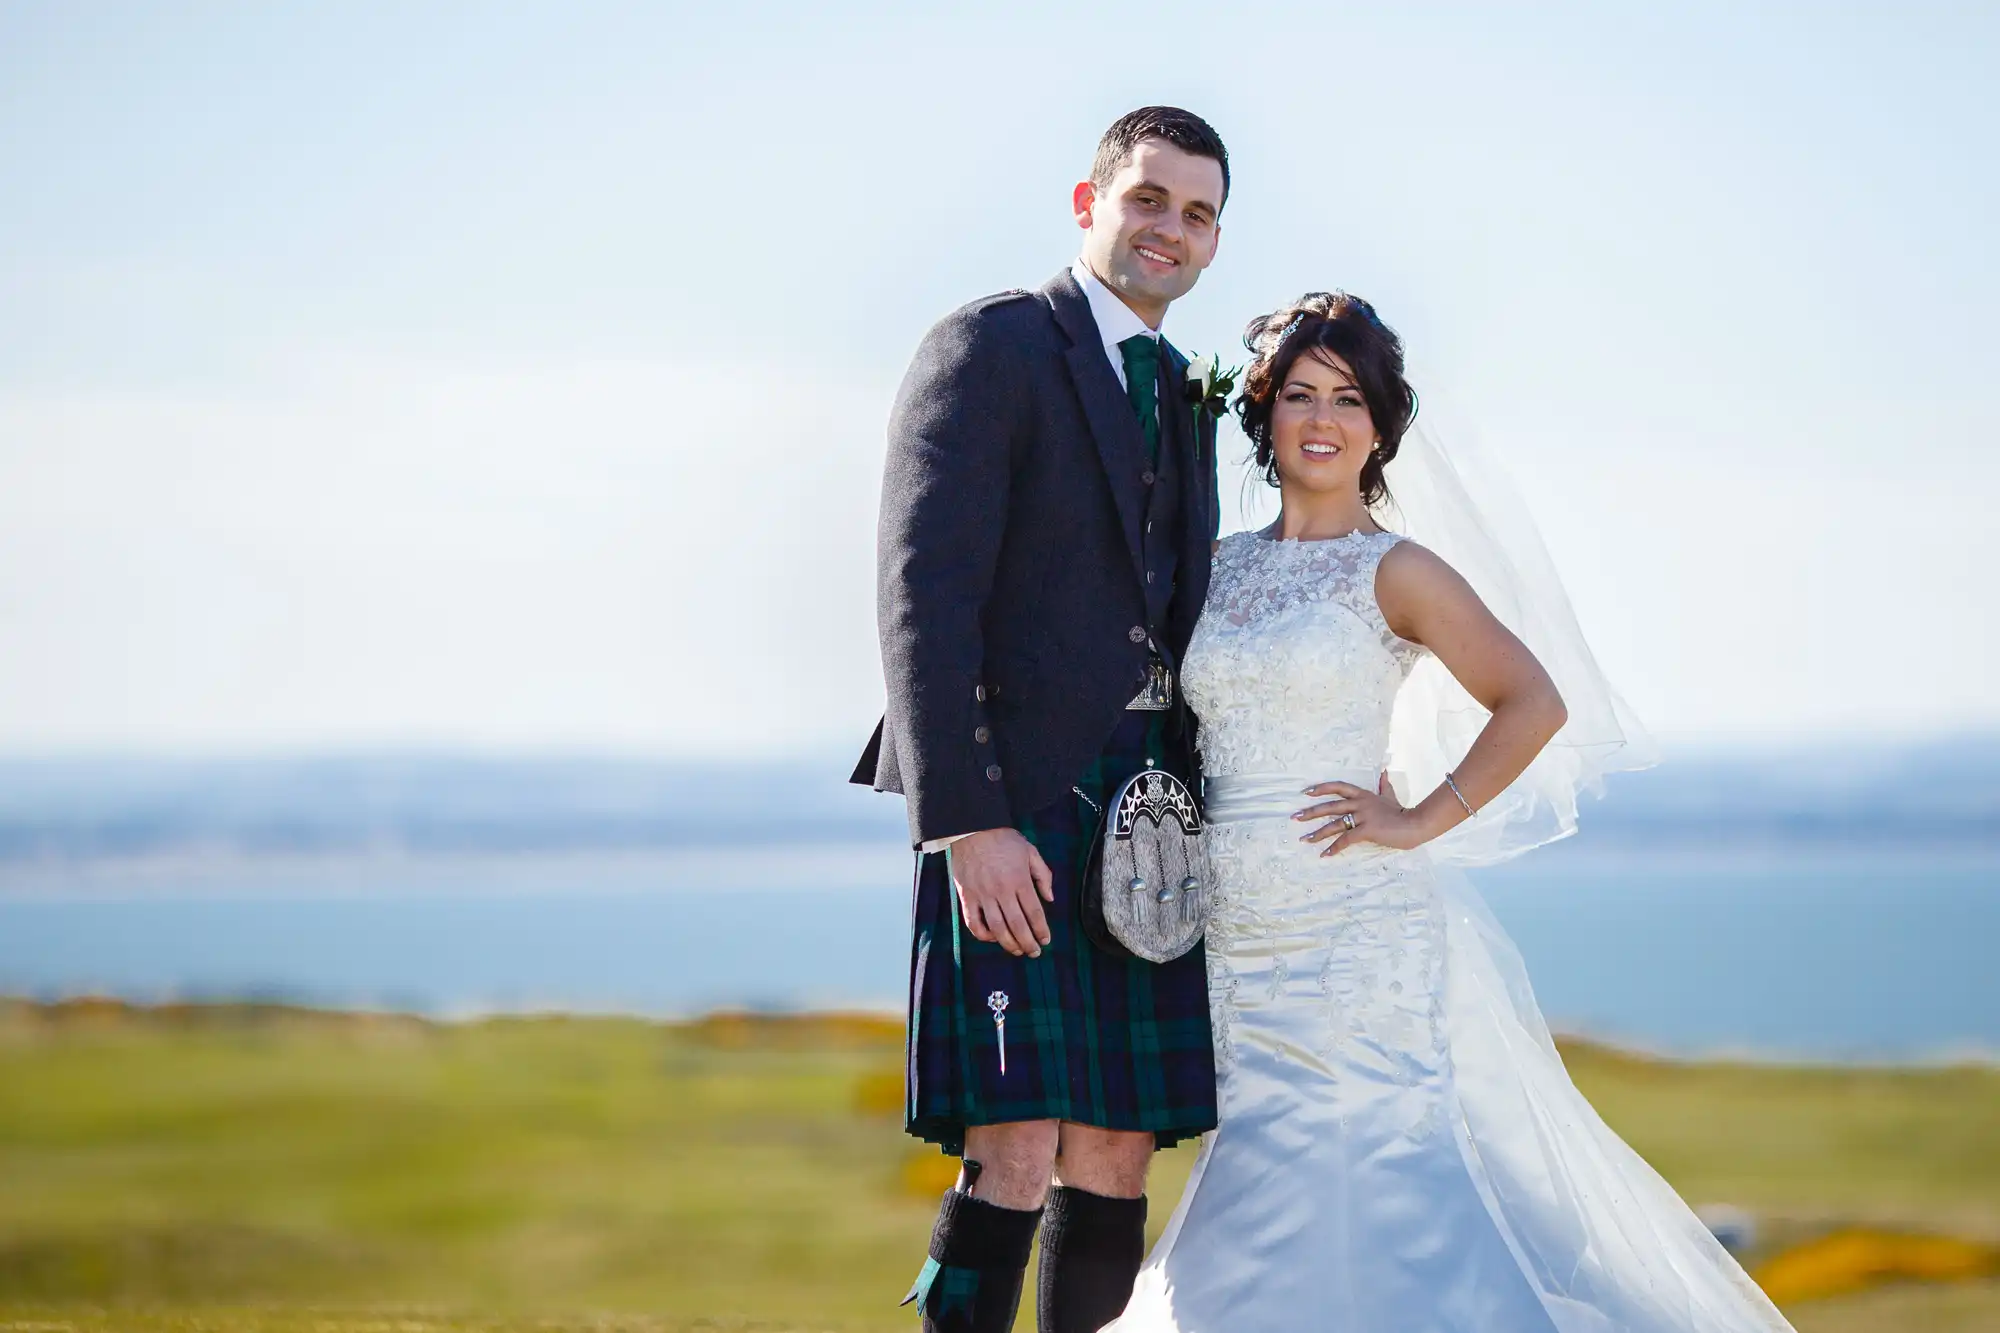 A bride and groom smiling outdoors, the groom in a kilt, with a scenic coastal backdrop.